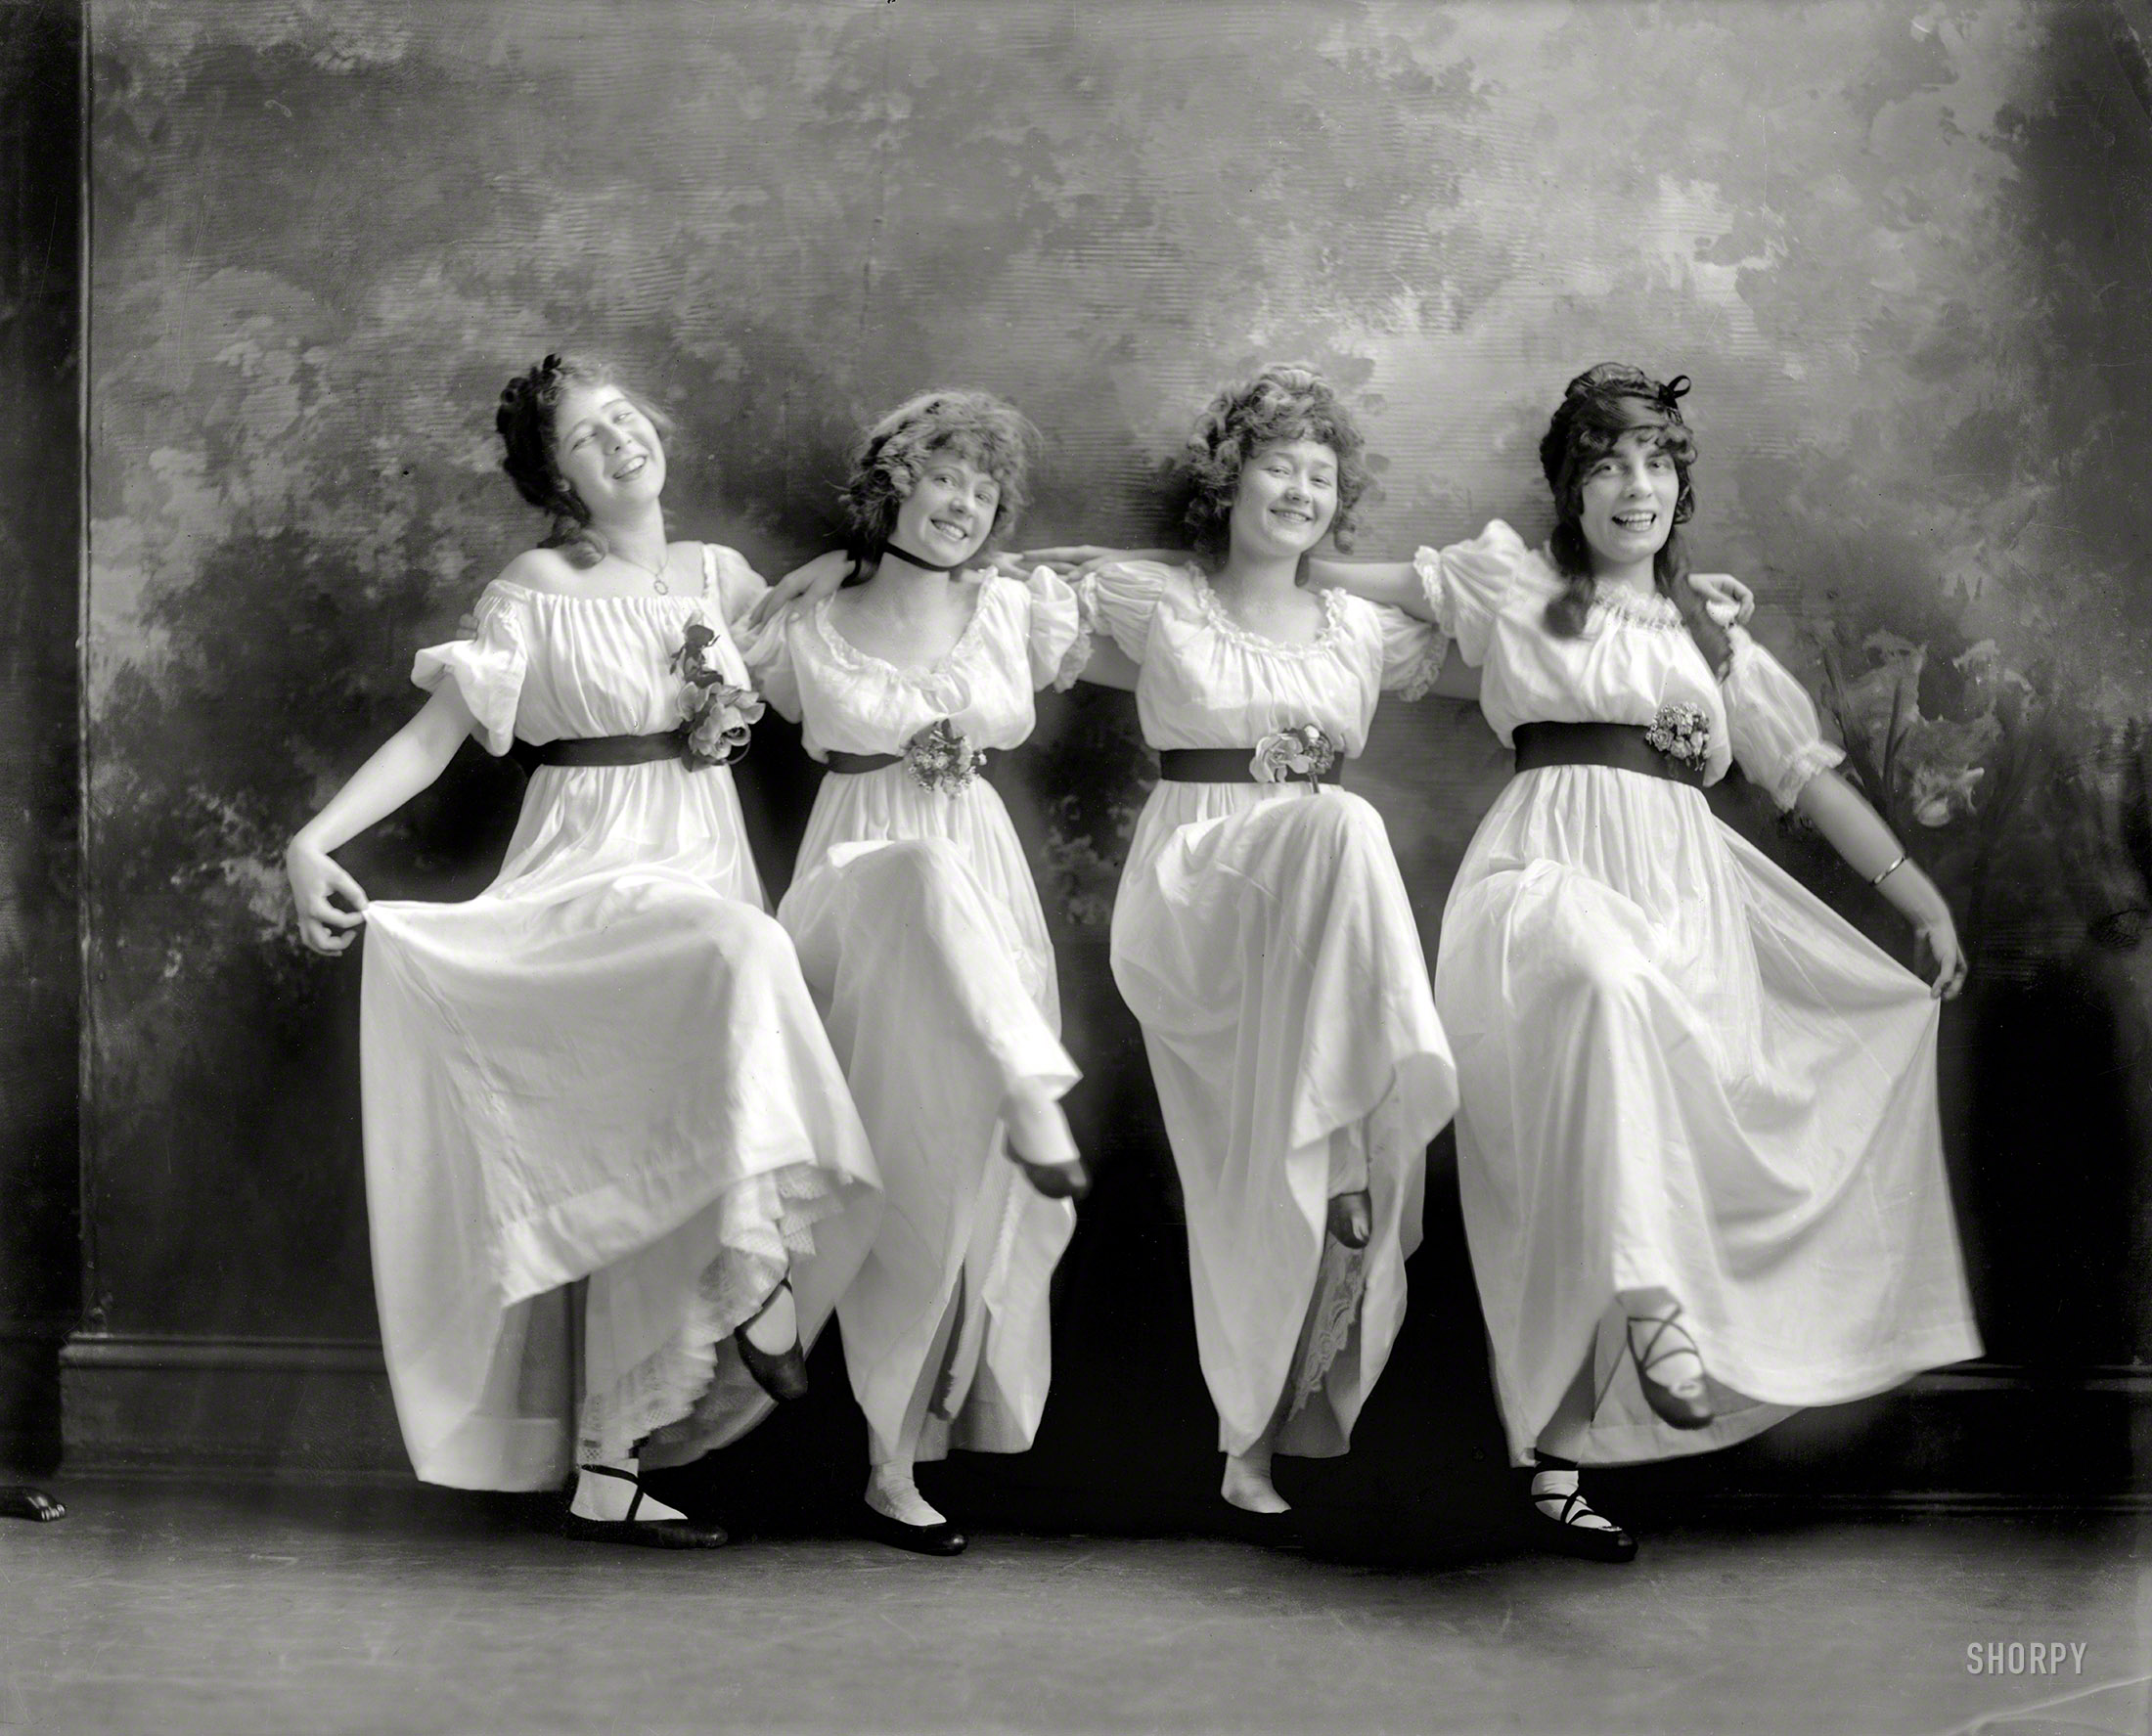 Washington, D.C., circa 1919. "Radium dance group." We'll bet they got glowing reviews. Harris & Ewing Collection glass negative. View full size.